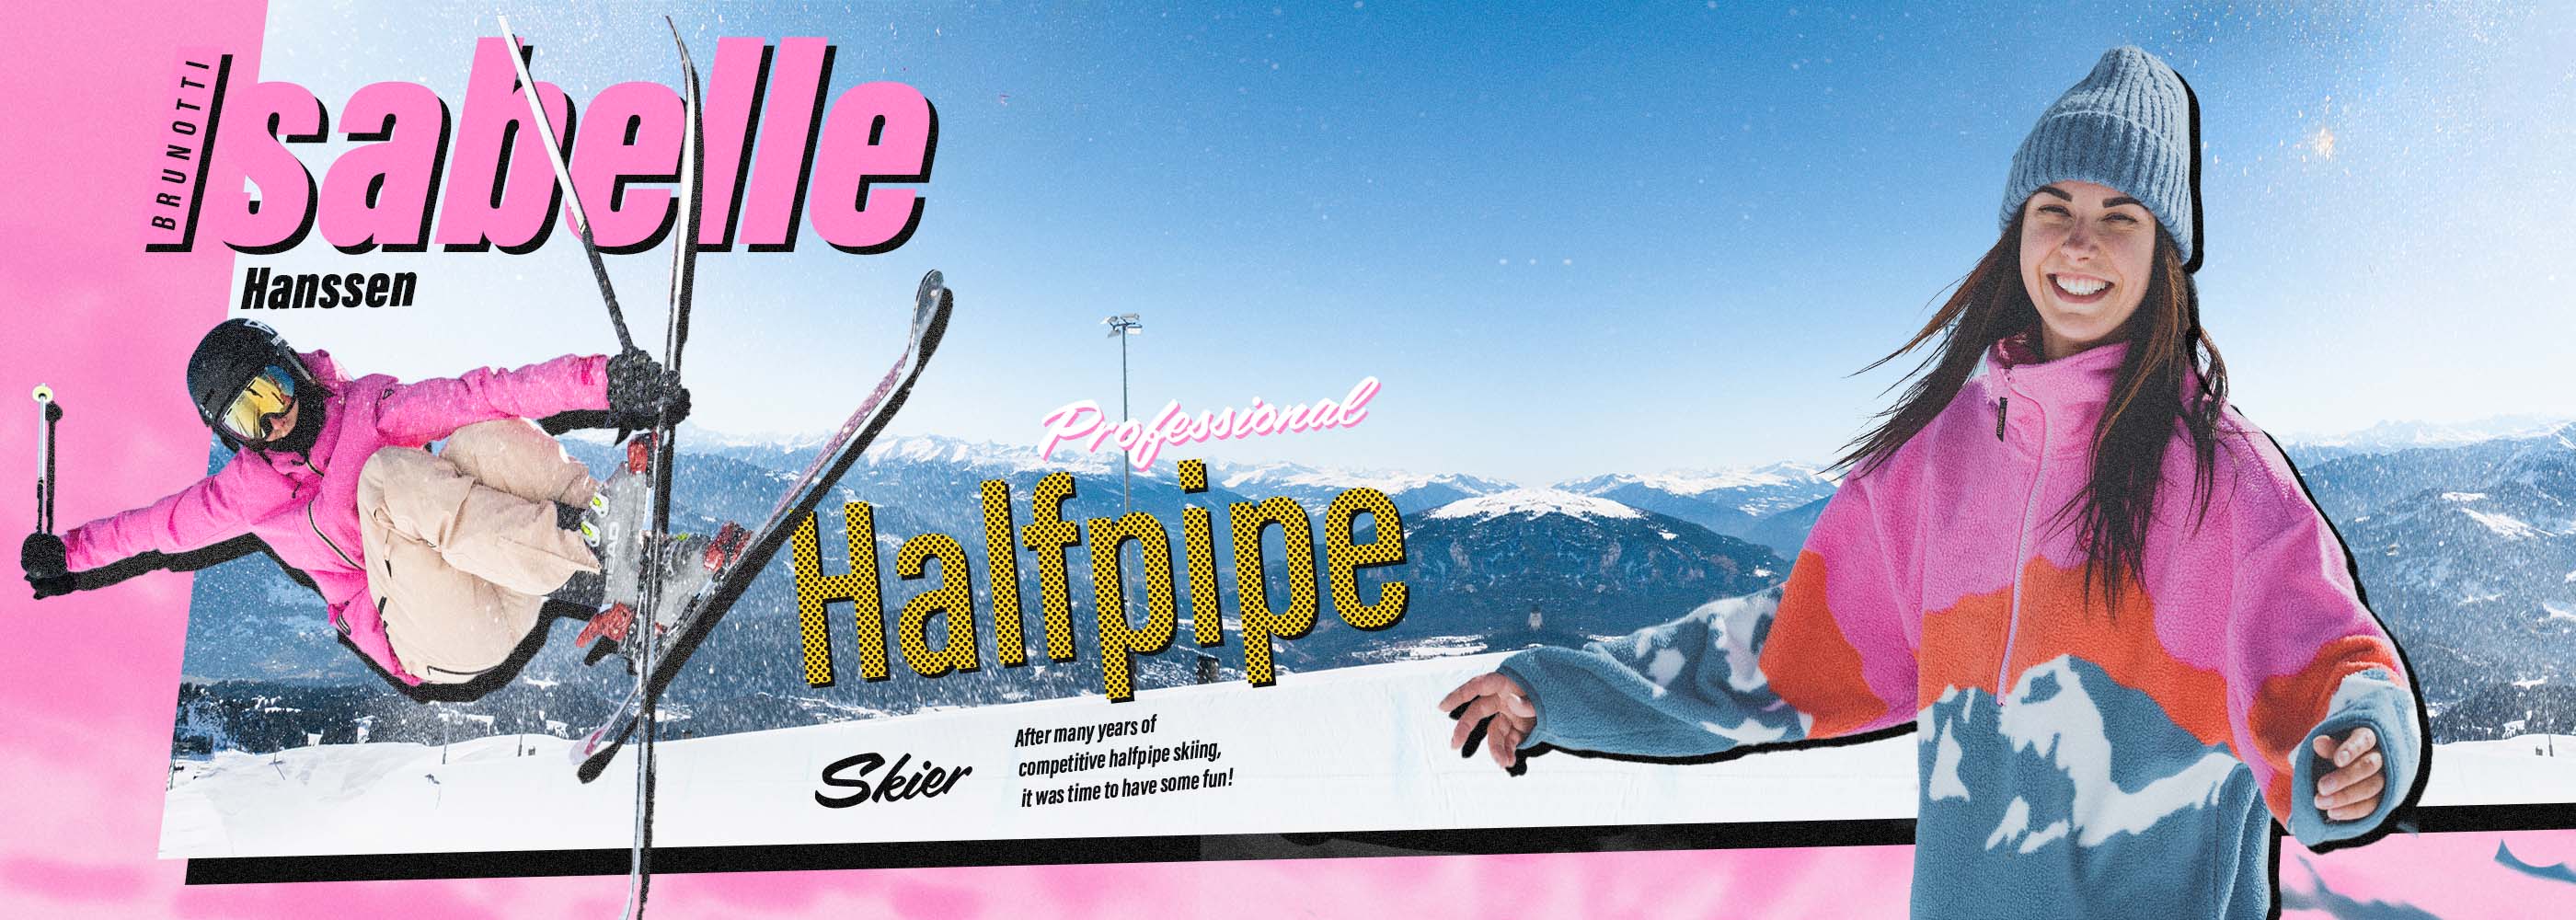 Halfpipe skier Isabelle Hanssen shows her favorite Brunotti winter colors like pink and blue on the slopes.